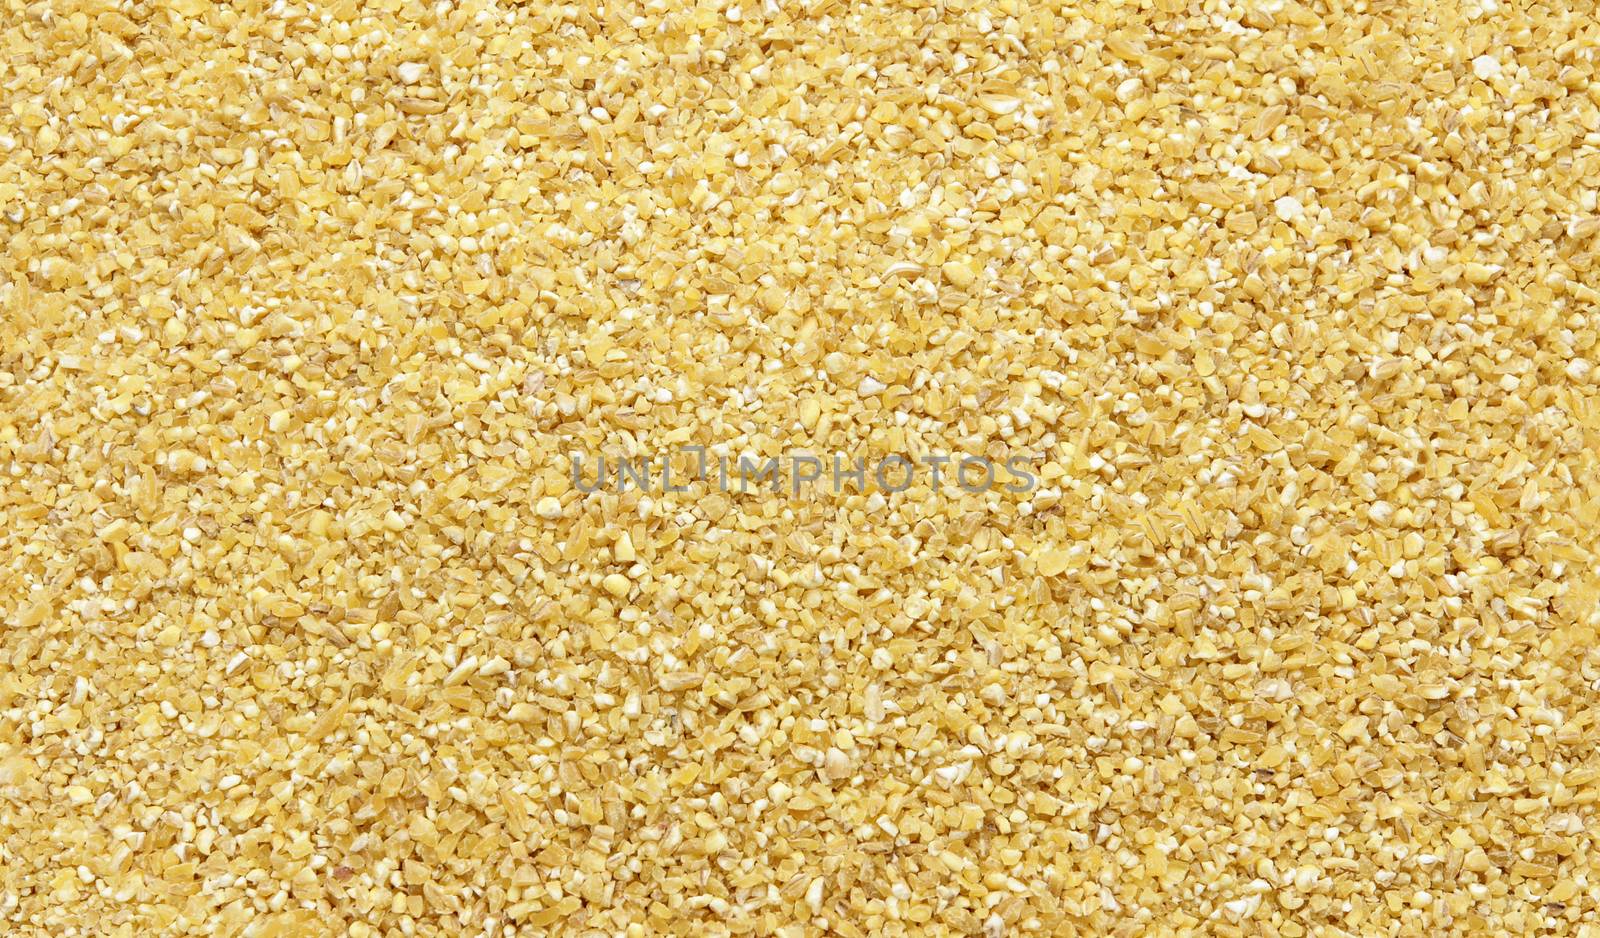 Fine ground durum wheat or groats -texture and details by Studia72